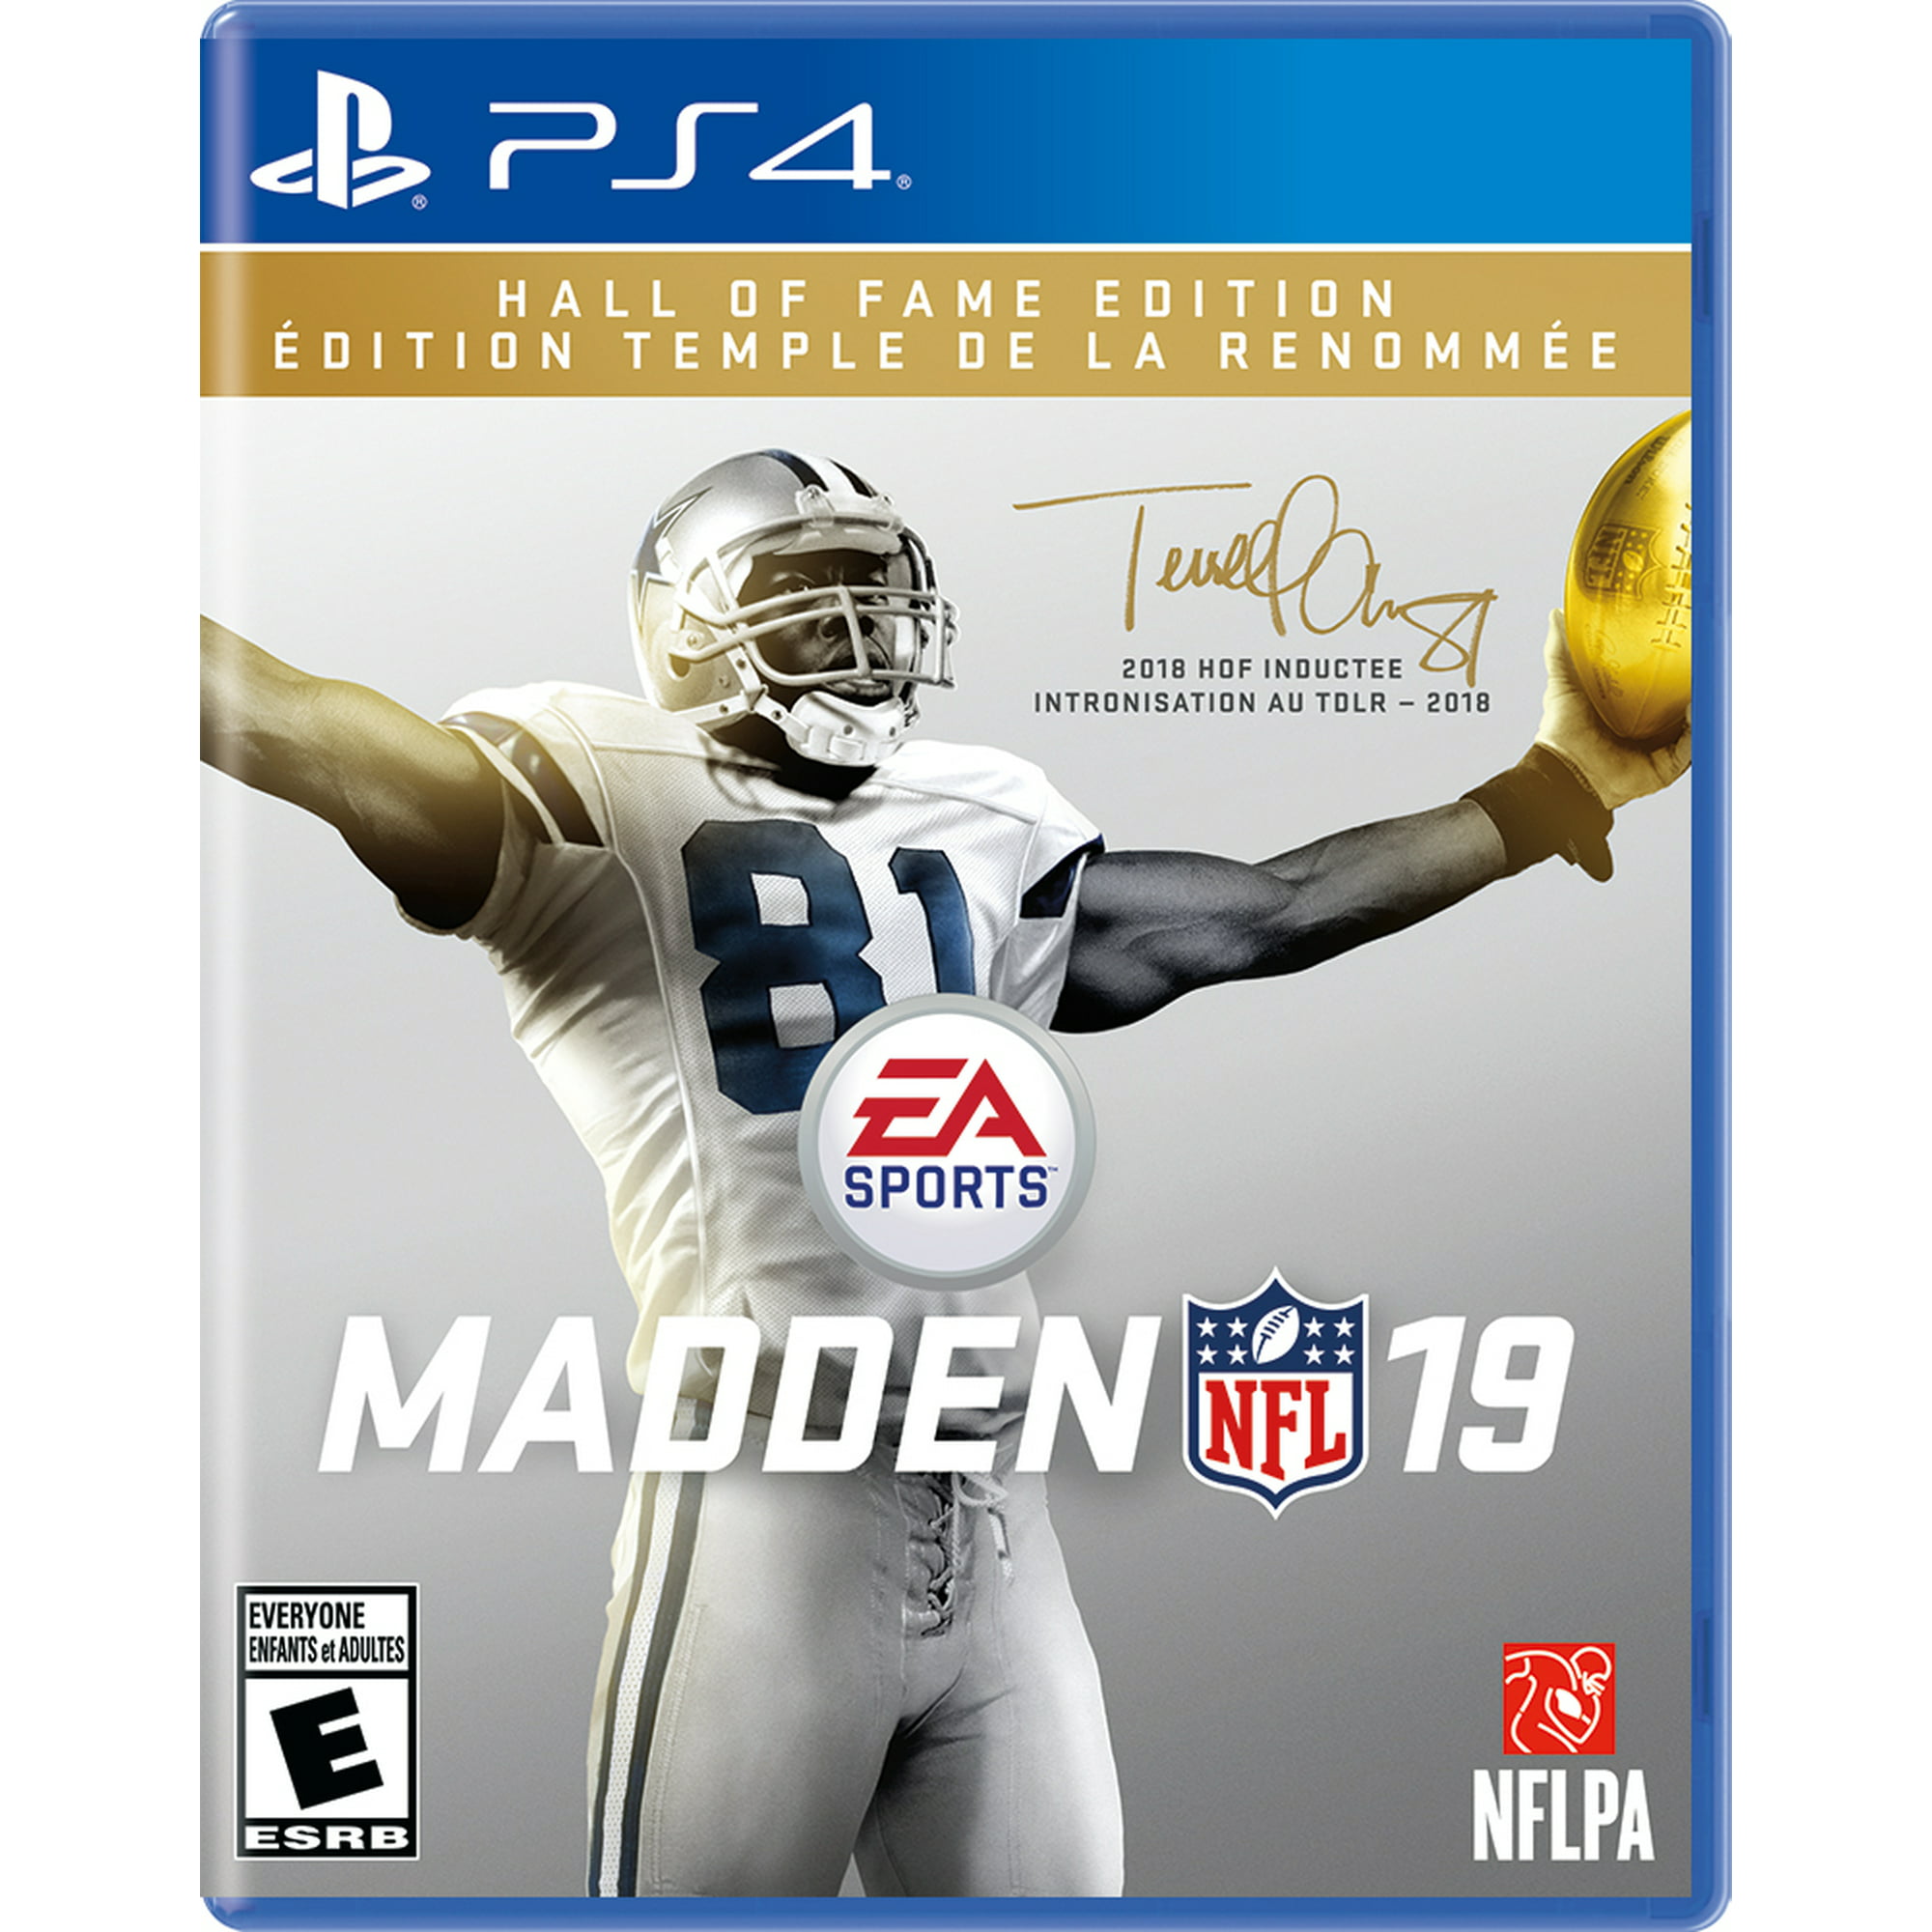 Madden NFL 19 Hall of Fame Edition, Electronic Arts, PlayStation 4,  014633739213 